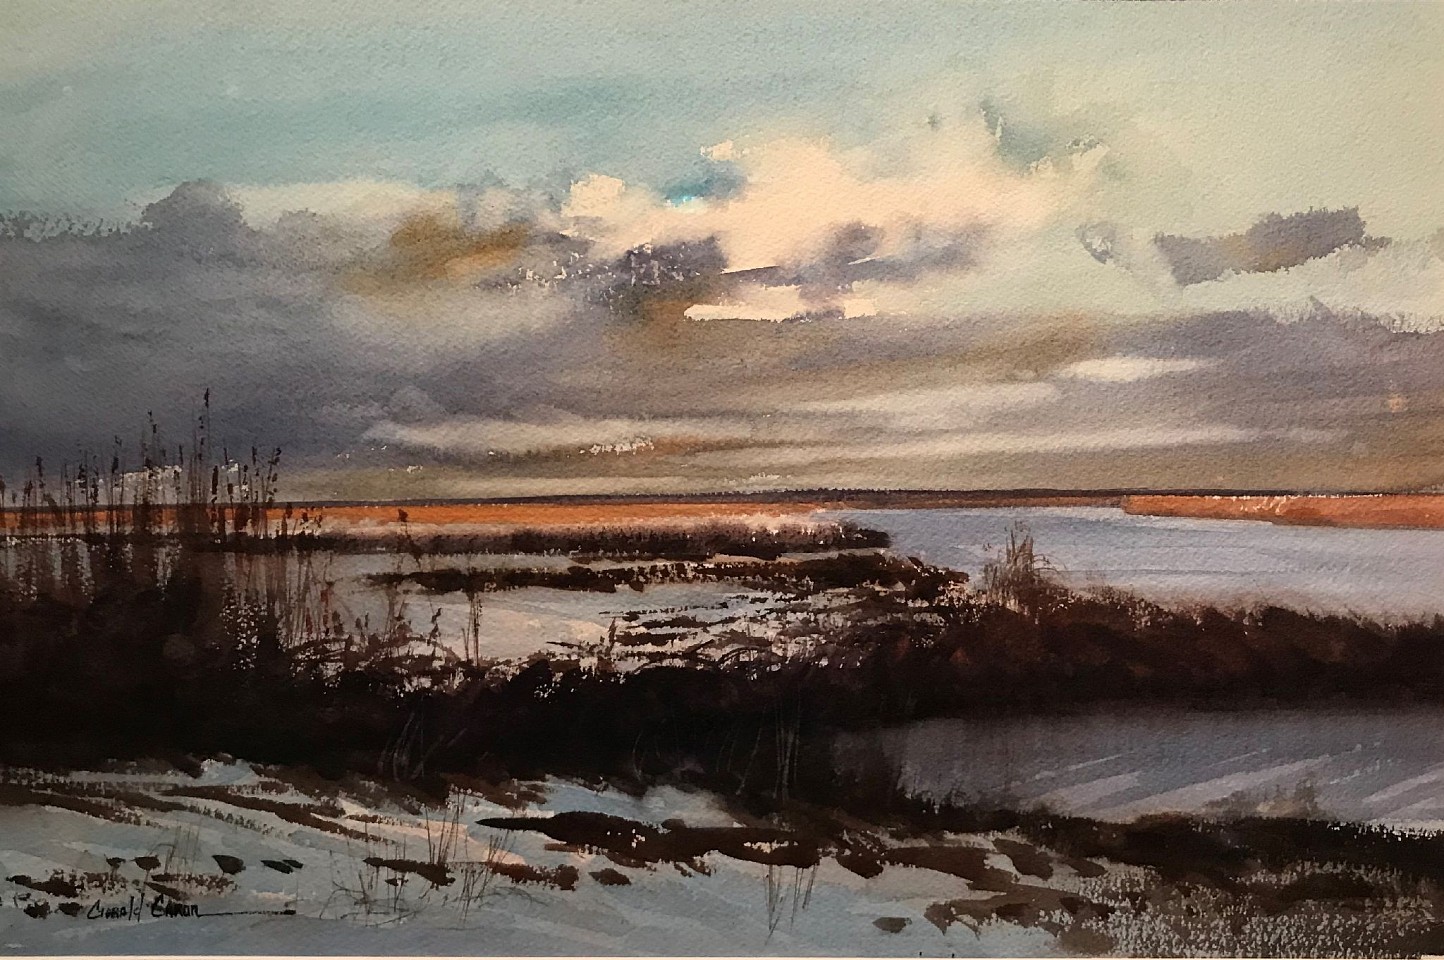 Jerry Caron, Smith Neck
watercolor on paper, 14 1/2"" x 22"" sight size
signed, Gerald Caron, lower left
LH 0817.03
$1,500